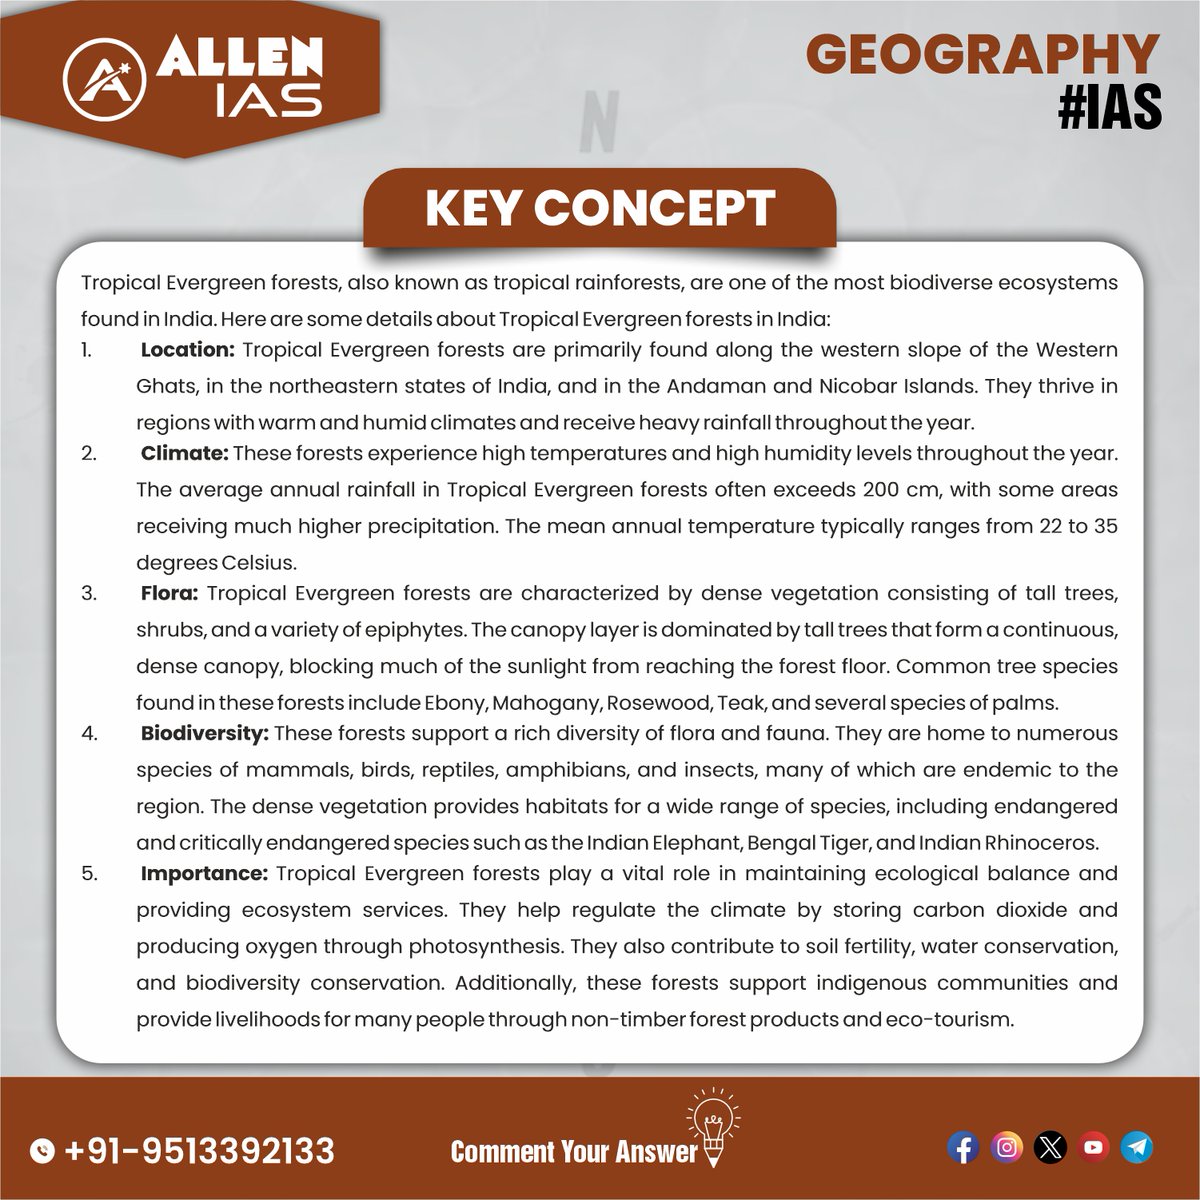 ➡️ Daily practice, daily progress.

📌 Join our UPSC prep telegram channel for your daily dose of exam-ready key concepts and questions.

#geography #geographyfacts #geographyquiz #ias #upsc #ips #upscexam #PCS #LBSNAA #upscaspirants #upscmotivation #alleniasofficial